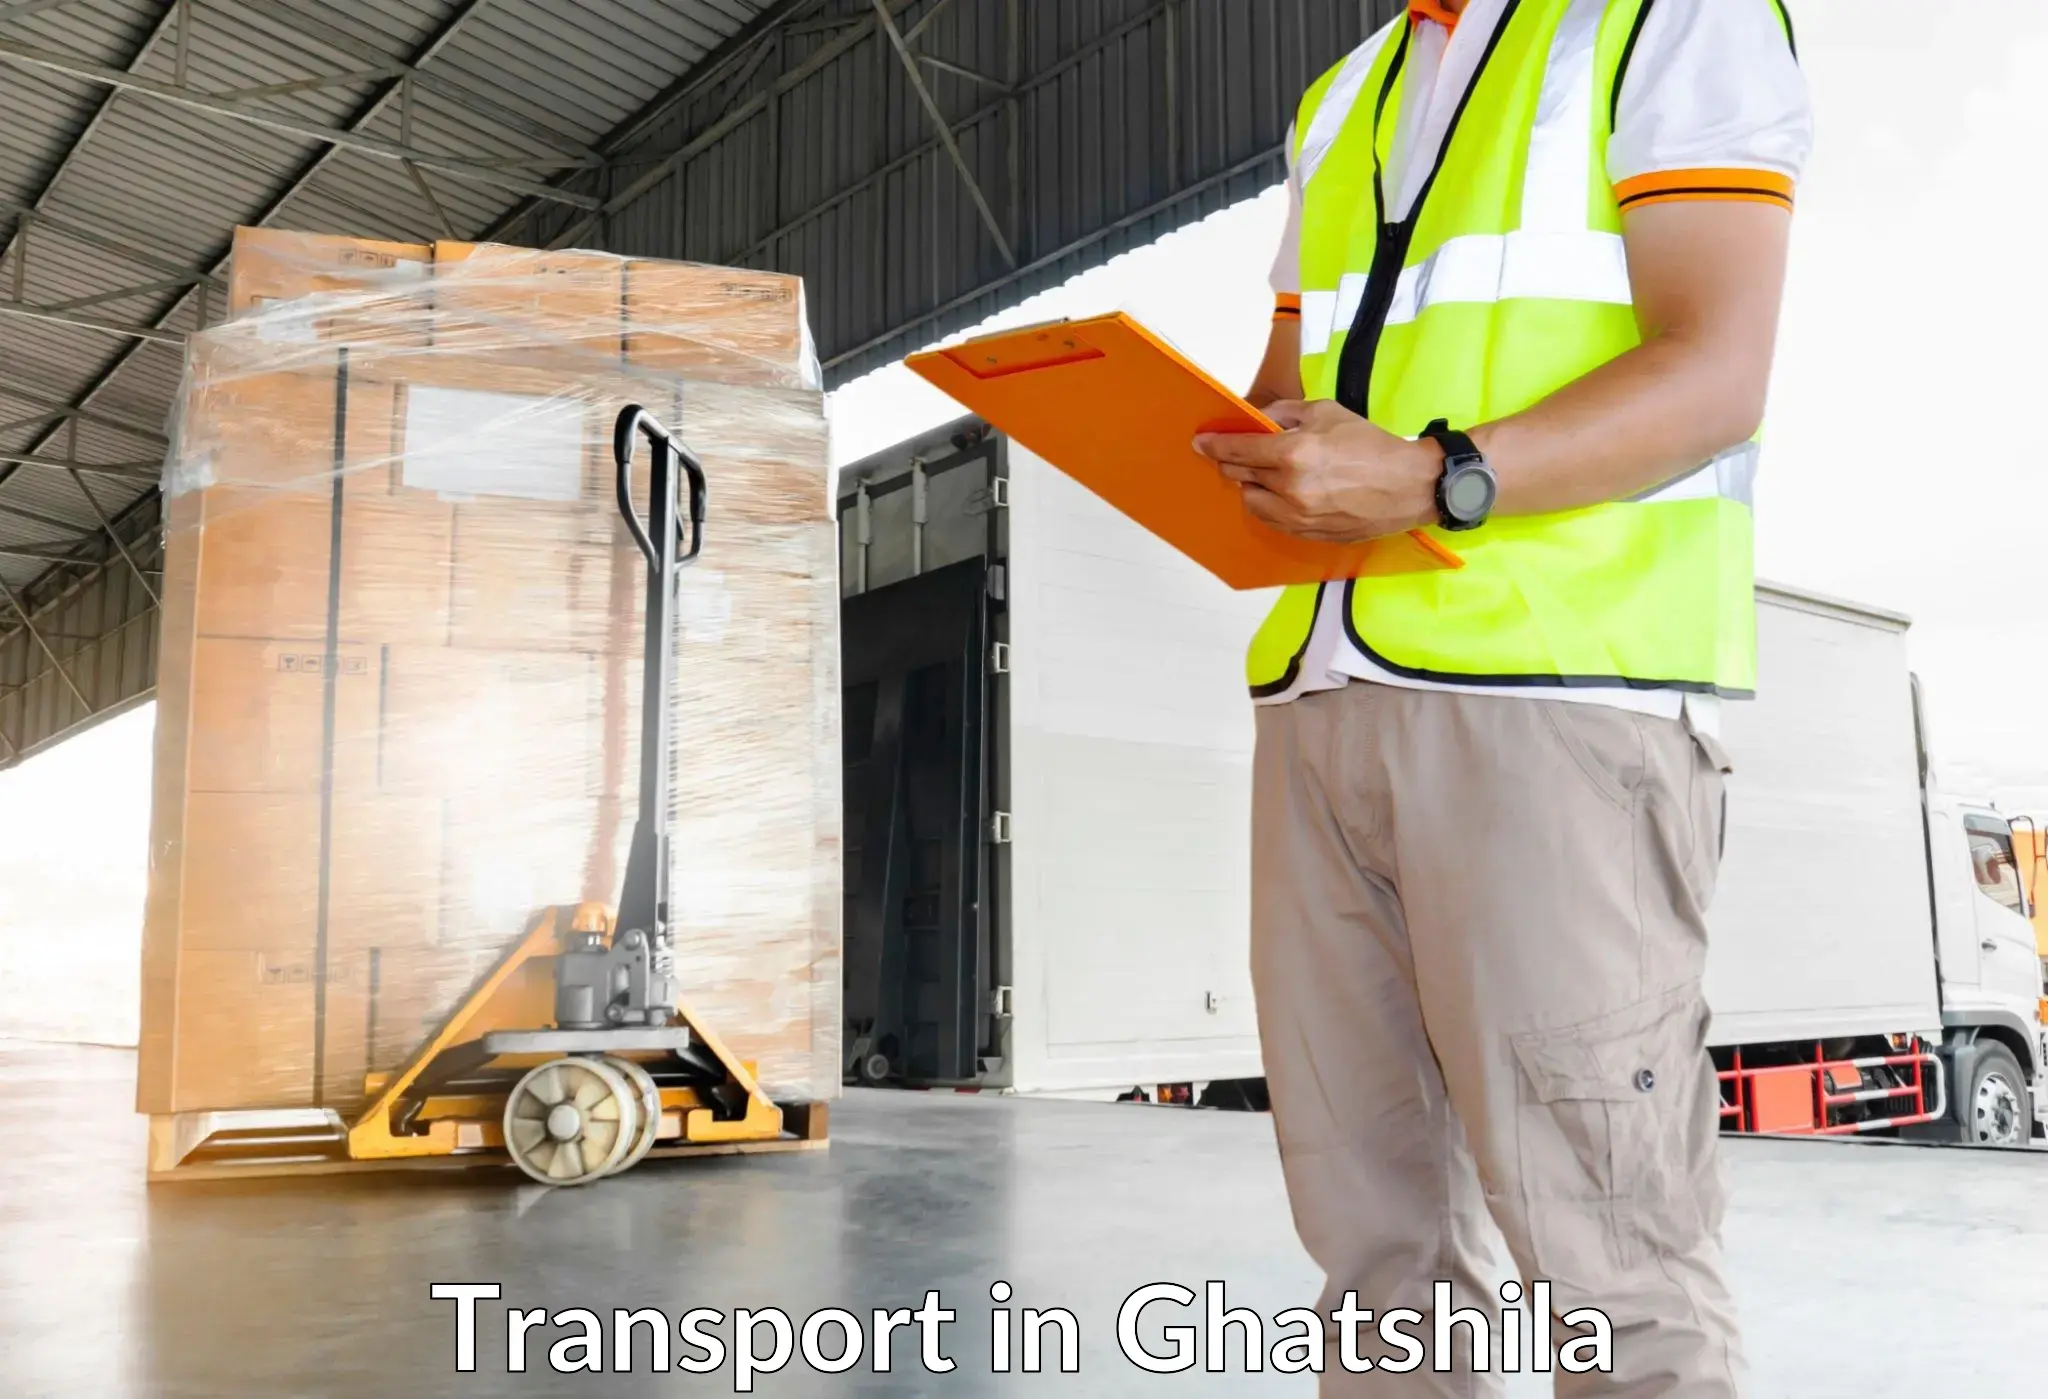 Container transportation services in Ghatshila